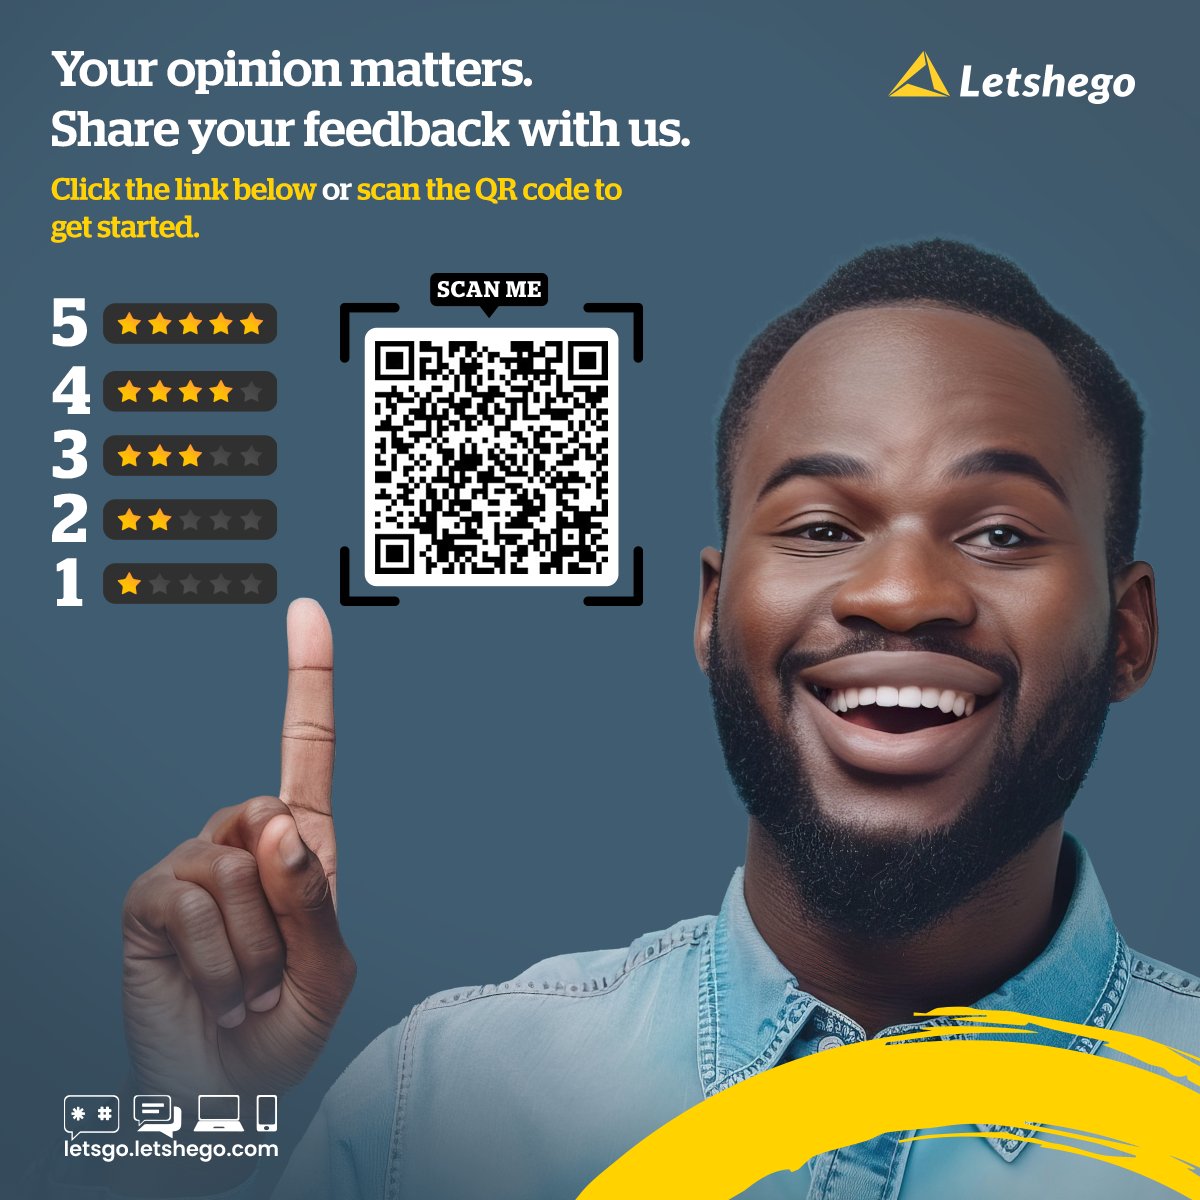 Your experience matters to us. Help us improve our services by filling out our customer feedback survey. Simply scan the QR code or click the link below to share your thoughts. Share your feedback here: surveymonkey.com/r/VXSVW27 #CustomerFeedback #Letshego #LetsGo